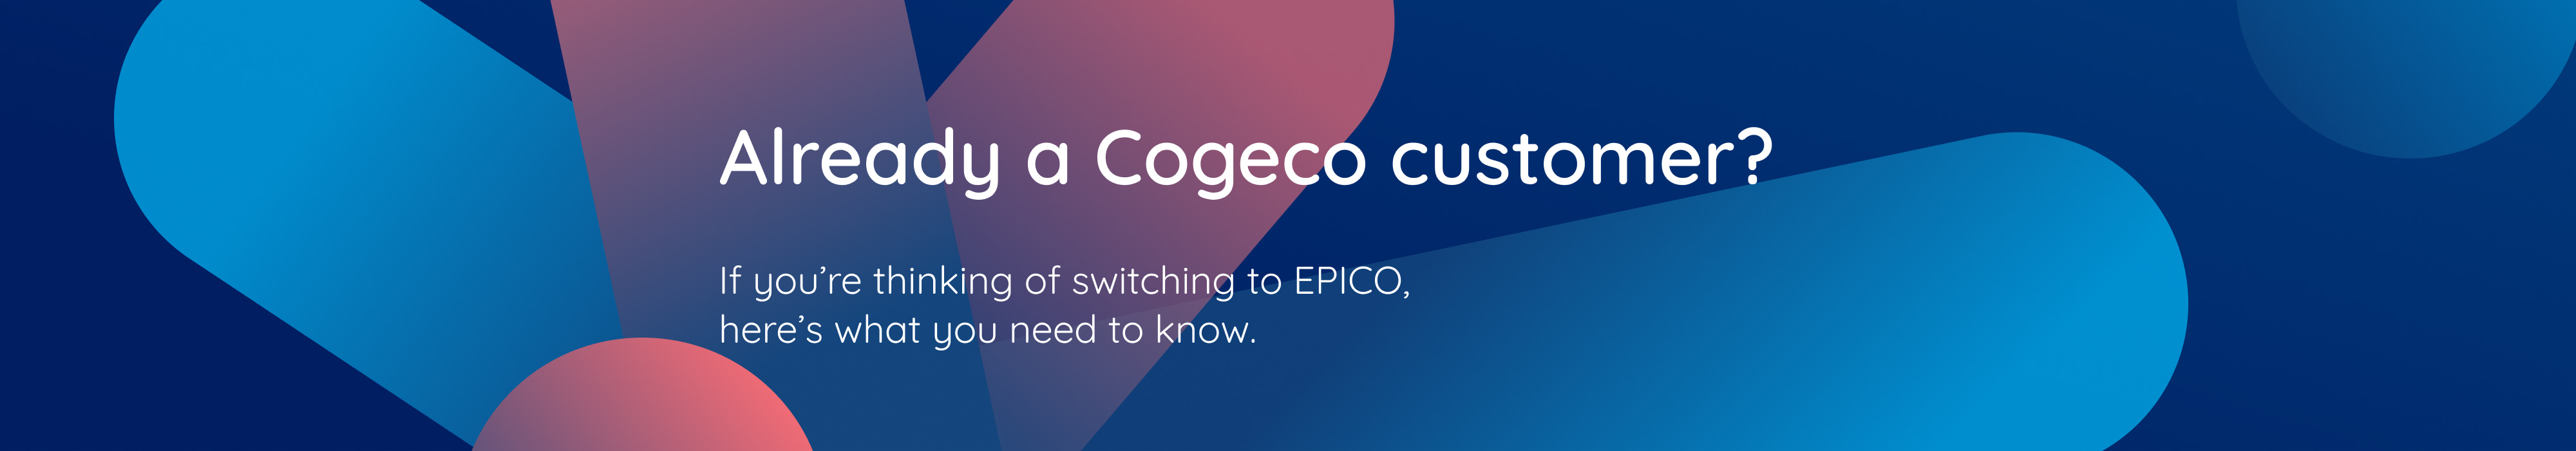 Already a Cogeco customer? If you’re thinking of switching to EPICO, here’s what you need to know.